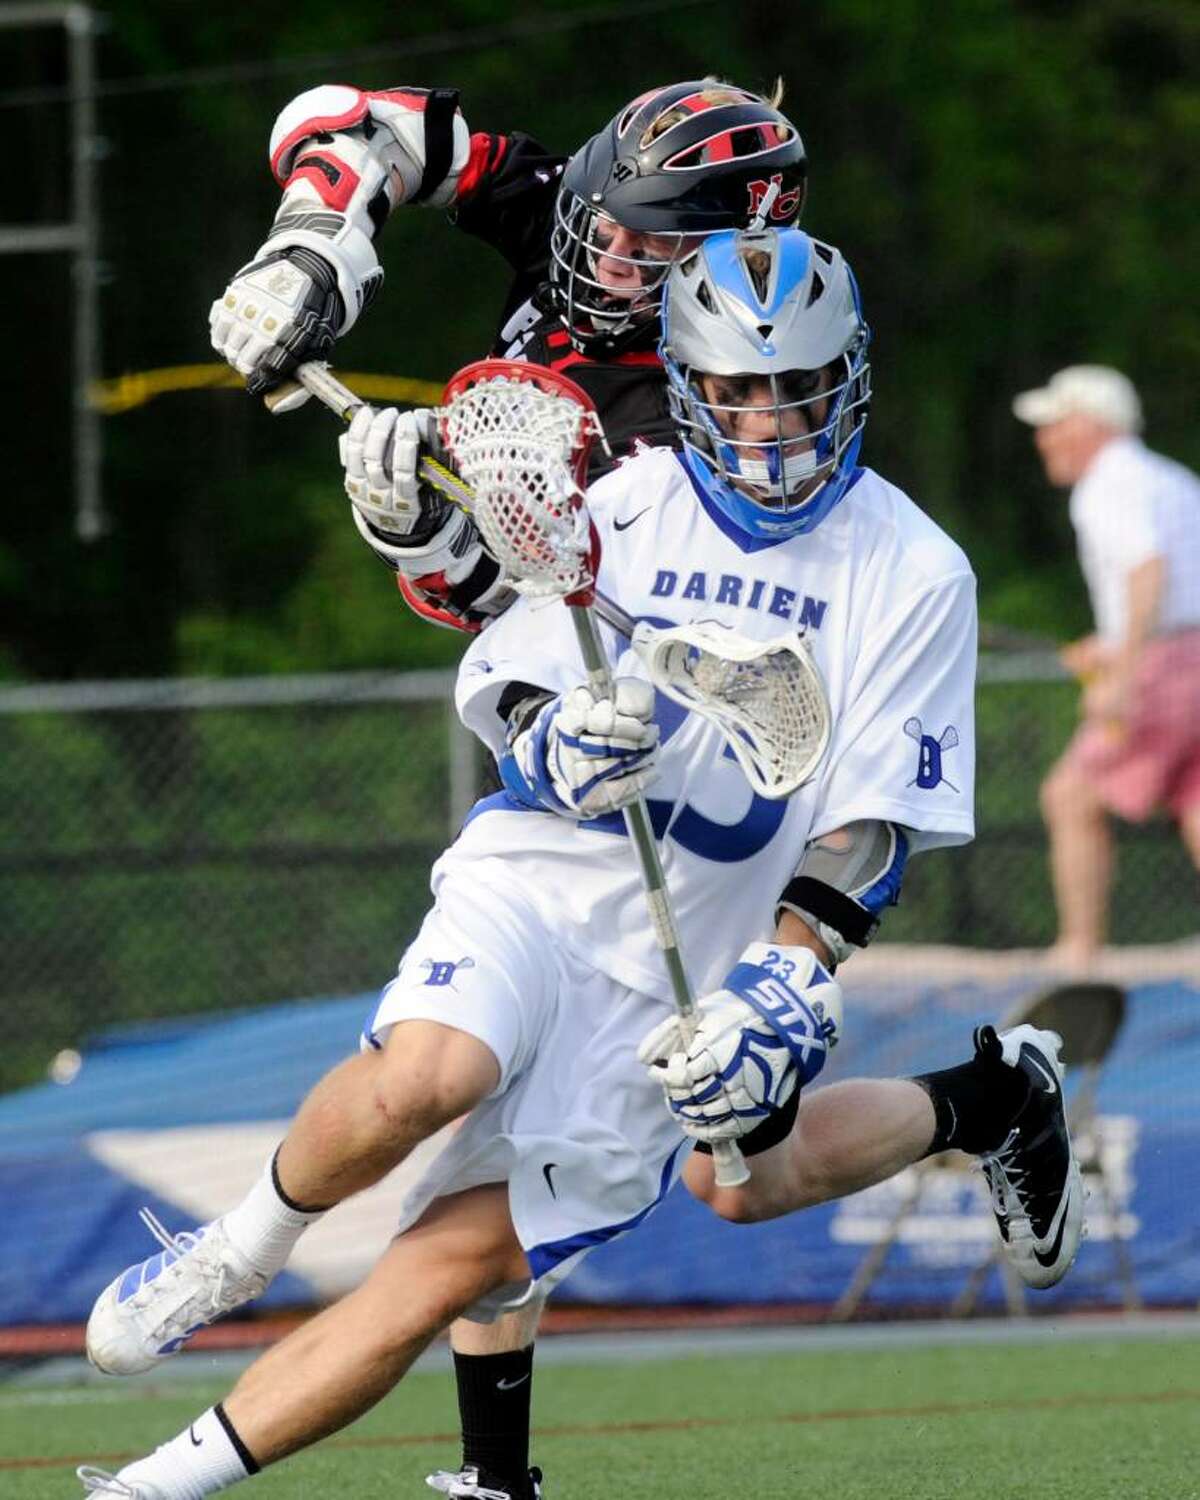 Darien's Alden Frelinghuysen spins away from New Canaan's Todd Bratches as Darien High School hosts New Canaan High in a boys lacrosse game Saturday, May 1, 2010. Darien won 11-5.